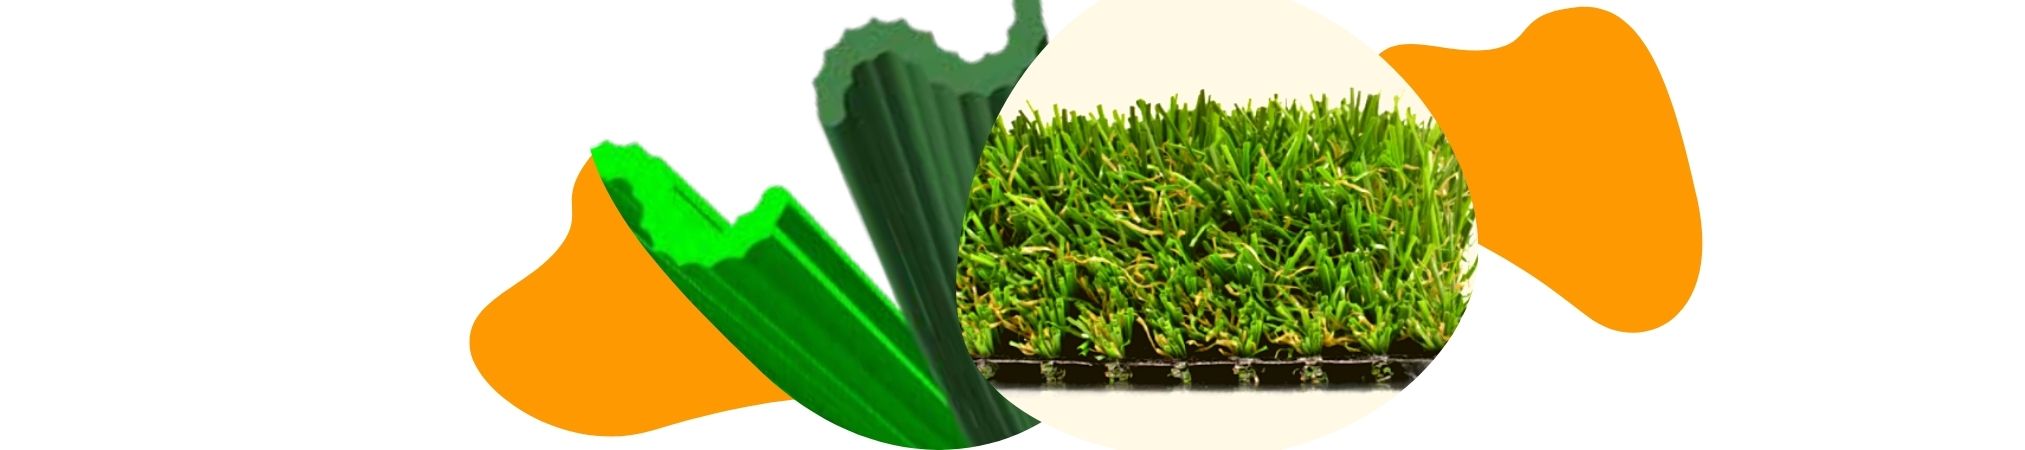 Shapes and Components of Artificial Grass